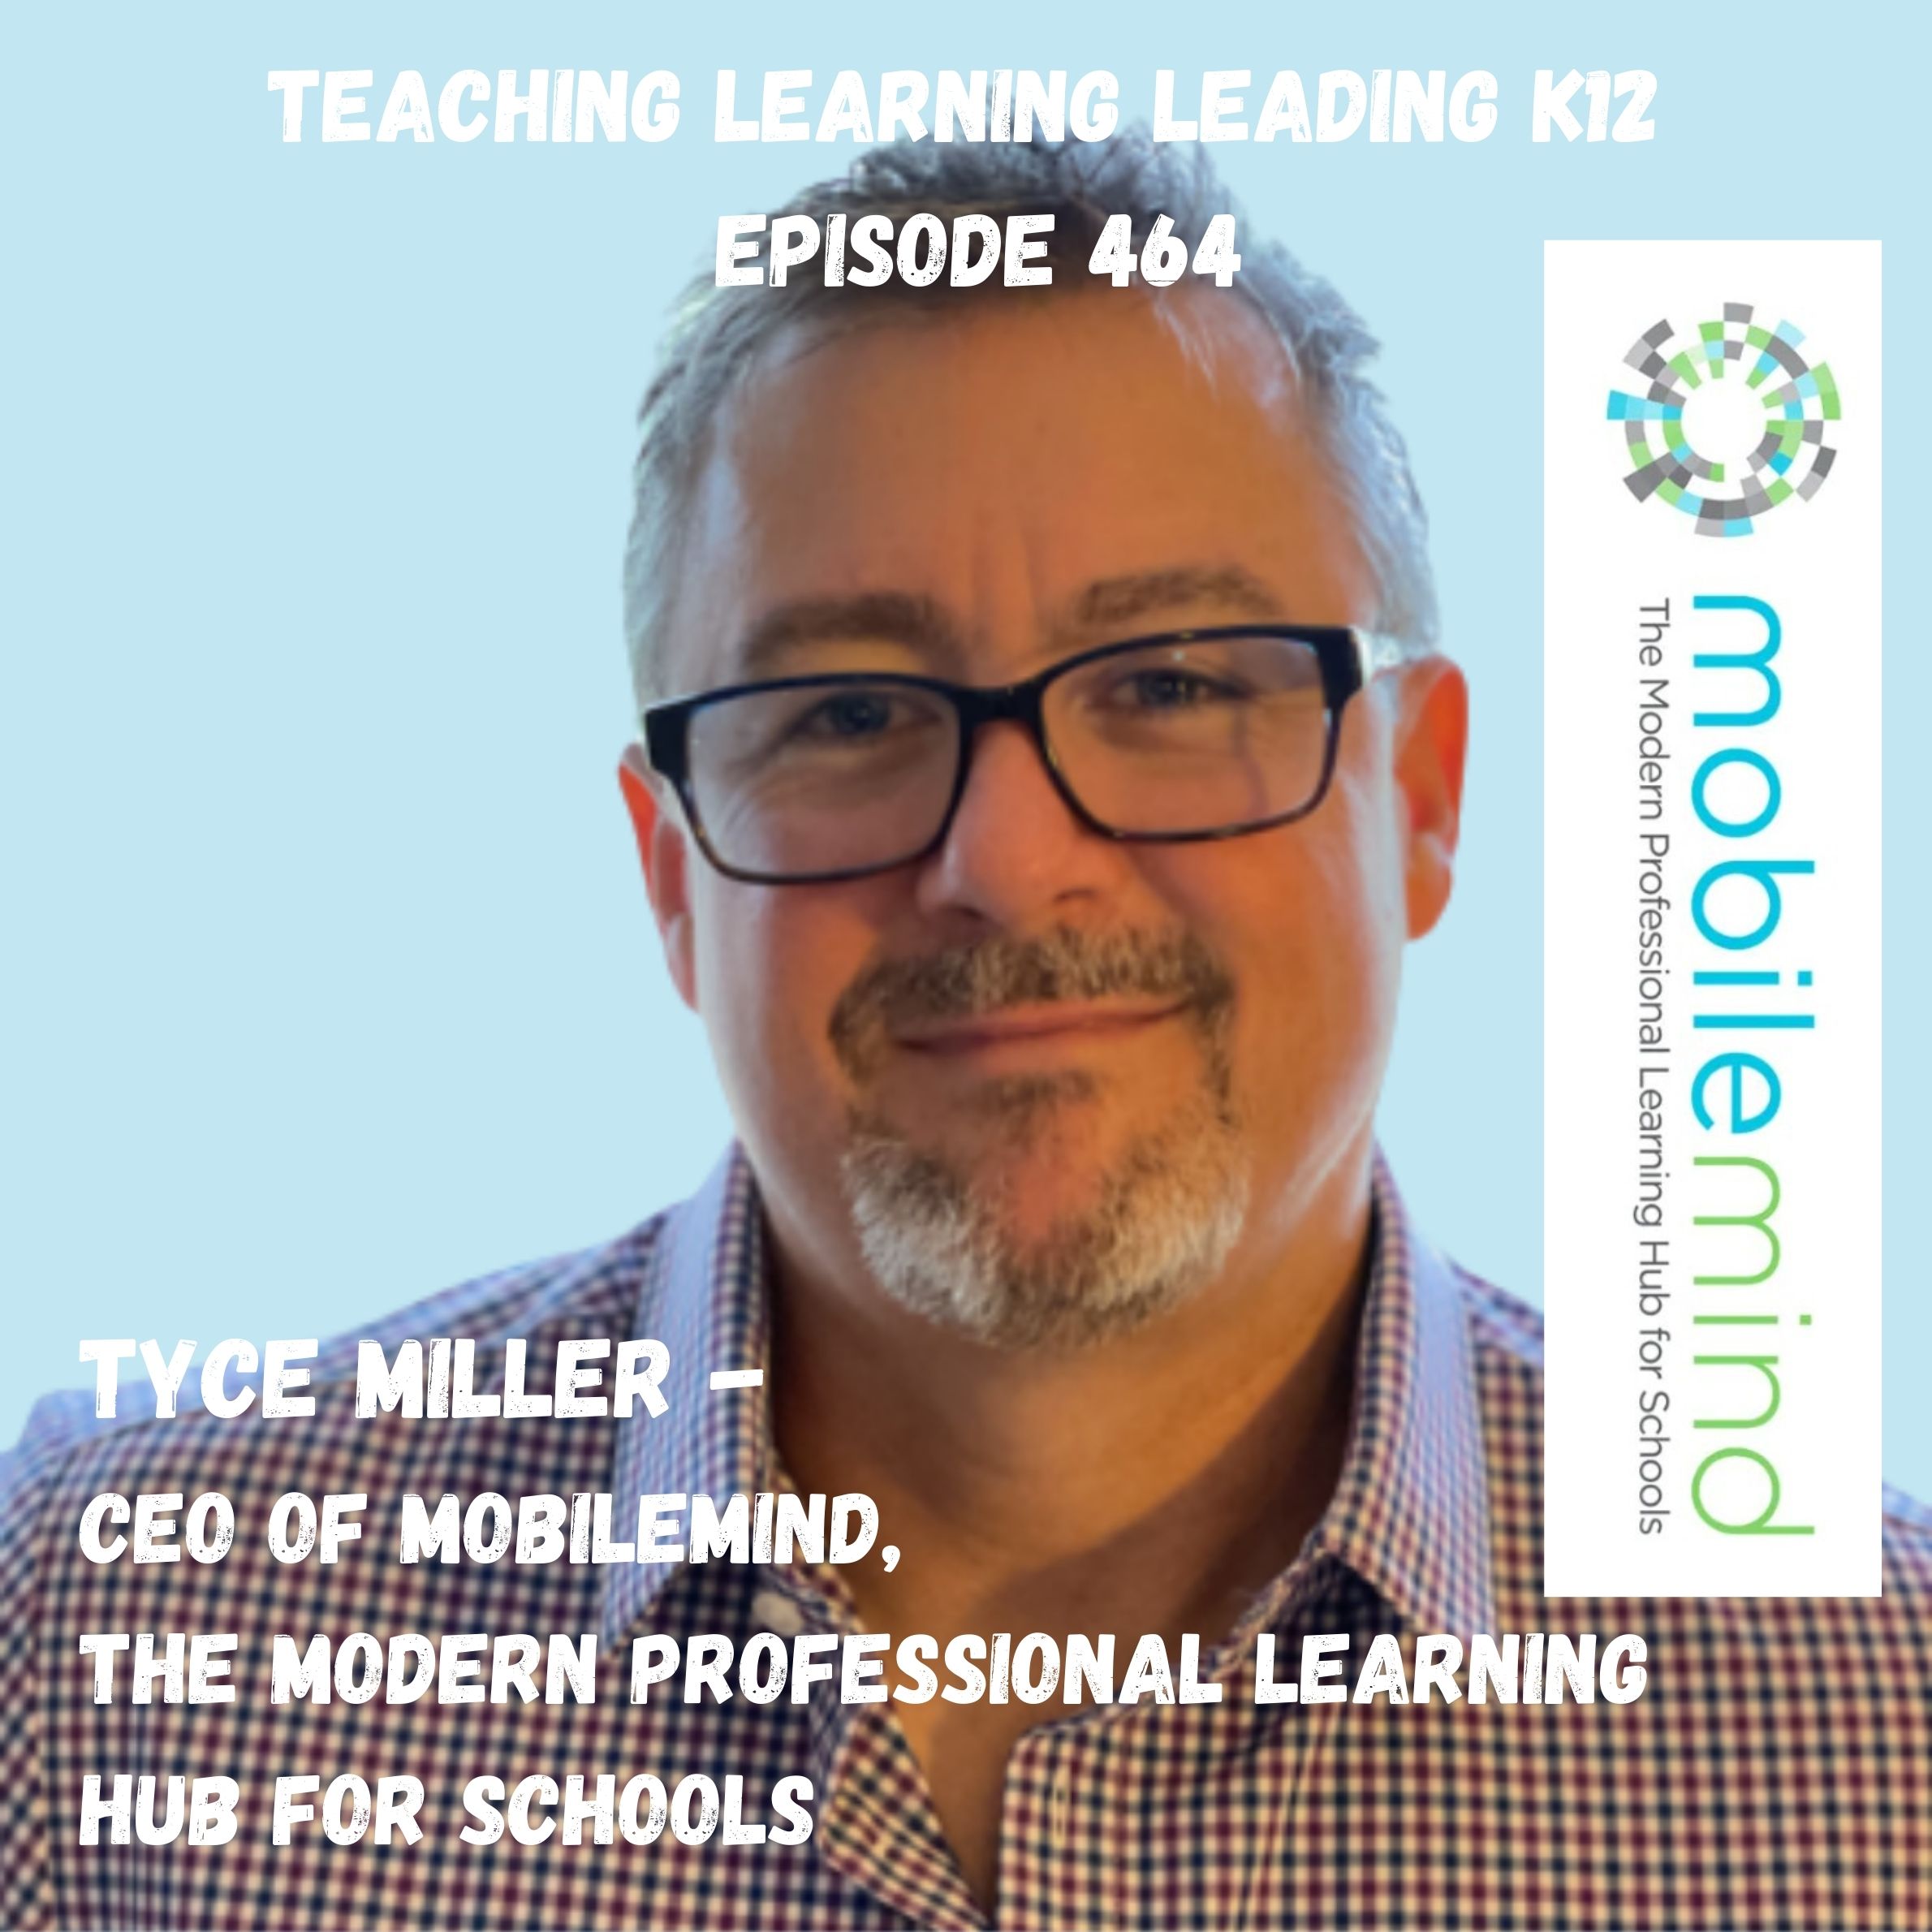 Tyce Miller, CEO of MobileMind, The Modern Professional Learning Hub for Schools - 464